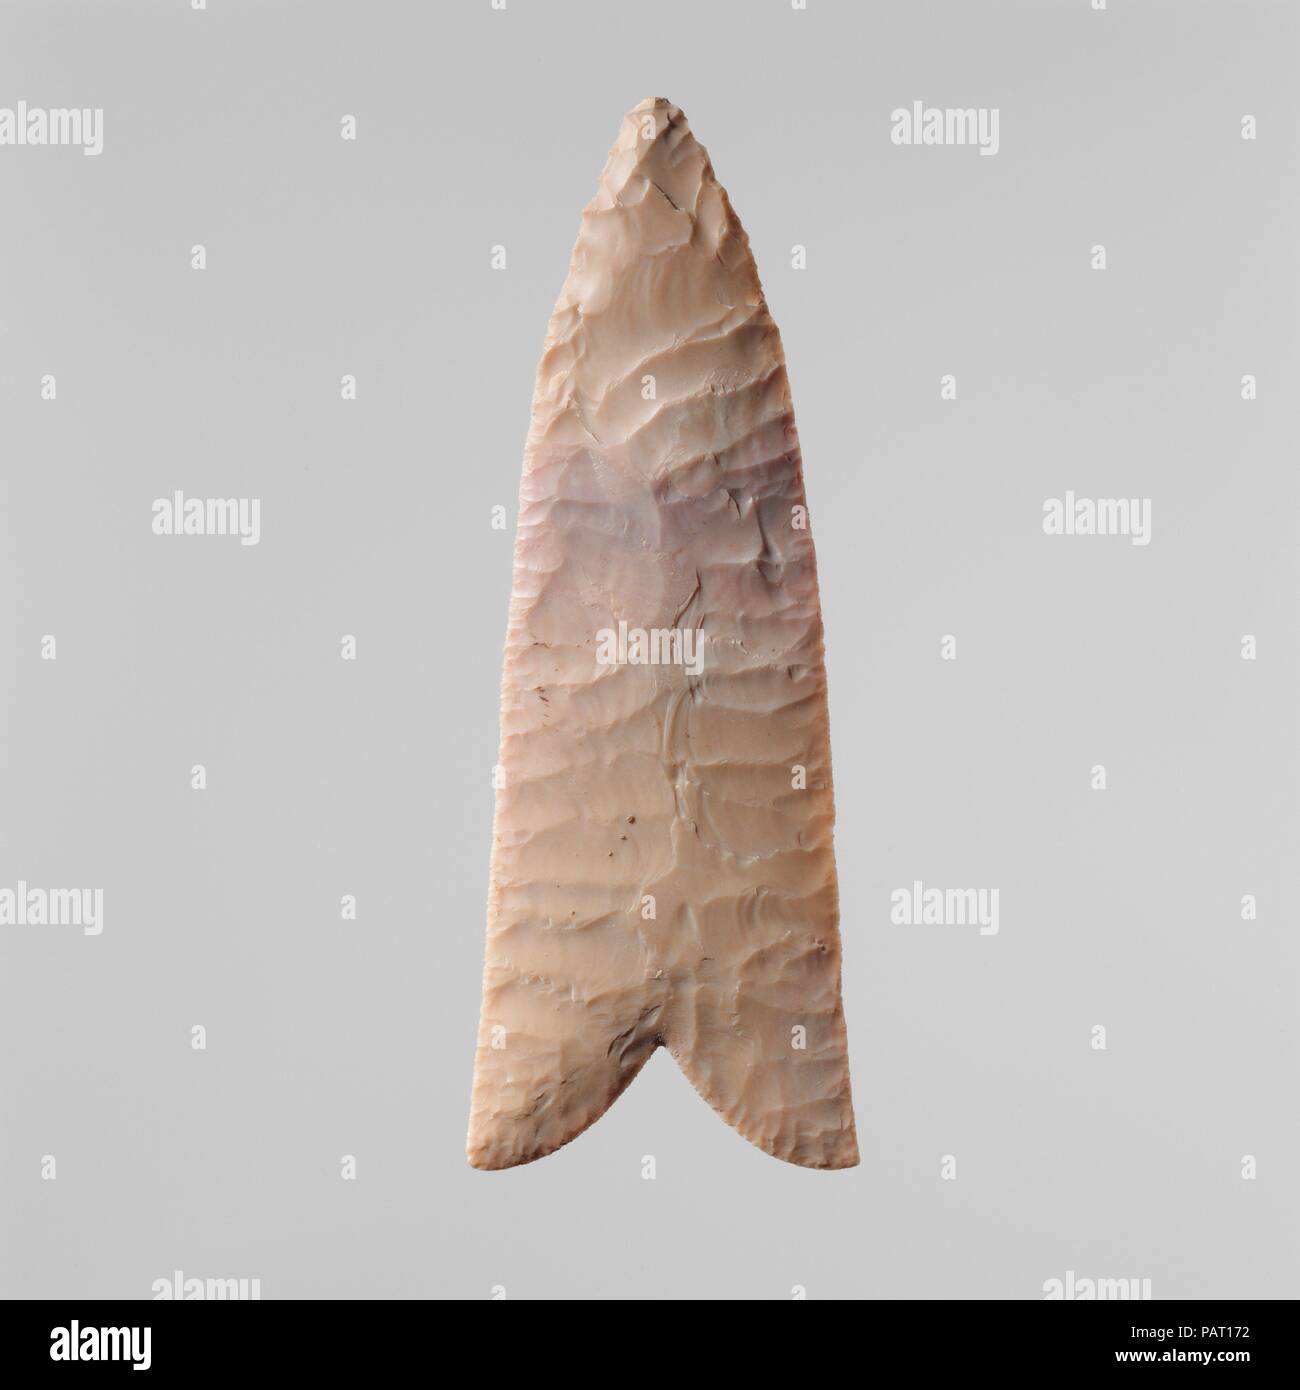 Flint Blade. Dimensions: L. 5.8 x 0.8 x 15.7 cm (2 5/16 x 5/16 x 6 3/16 in.). Date: ca. 3650-3300 B.C..  Blades such as this one were included in burials throughout the Predynastic Period.The cutting edge is the V-shaped notch. Although the implement's exact purpose is unknown, there is persua-sive evidence that it was used at birth to cut the umbilical cord and was placed in the grave to assist its owner's rebirth into the afterlife.  A similar instrument was used throughout Egyptian history in the funerary rite known as the 'Opening of the Mouth': touched to the mouth of the deceased's mumm Stock Photo